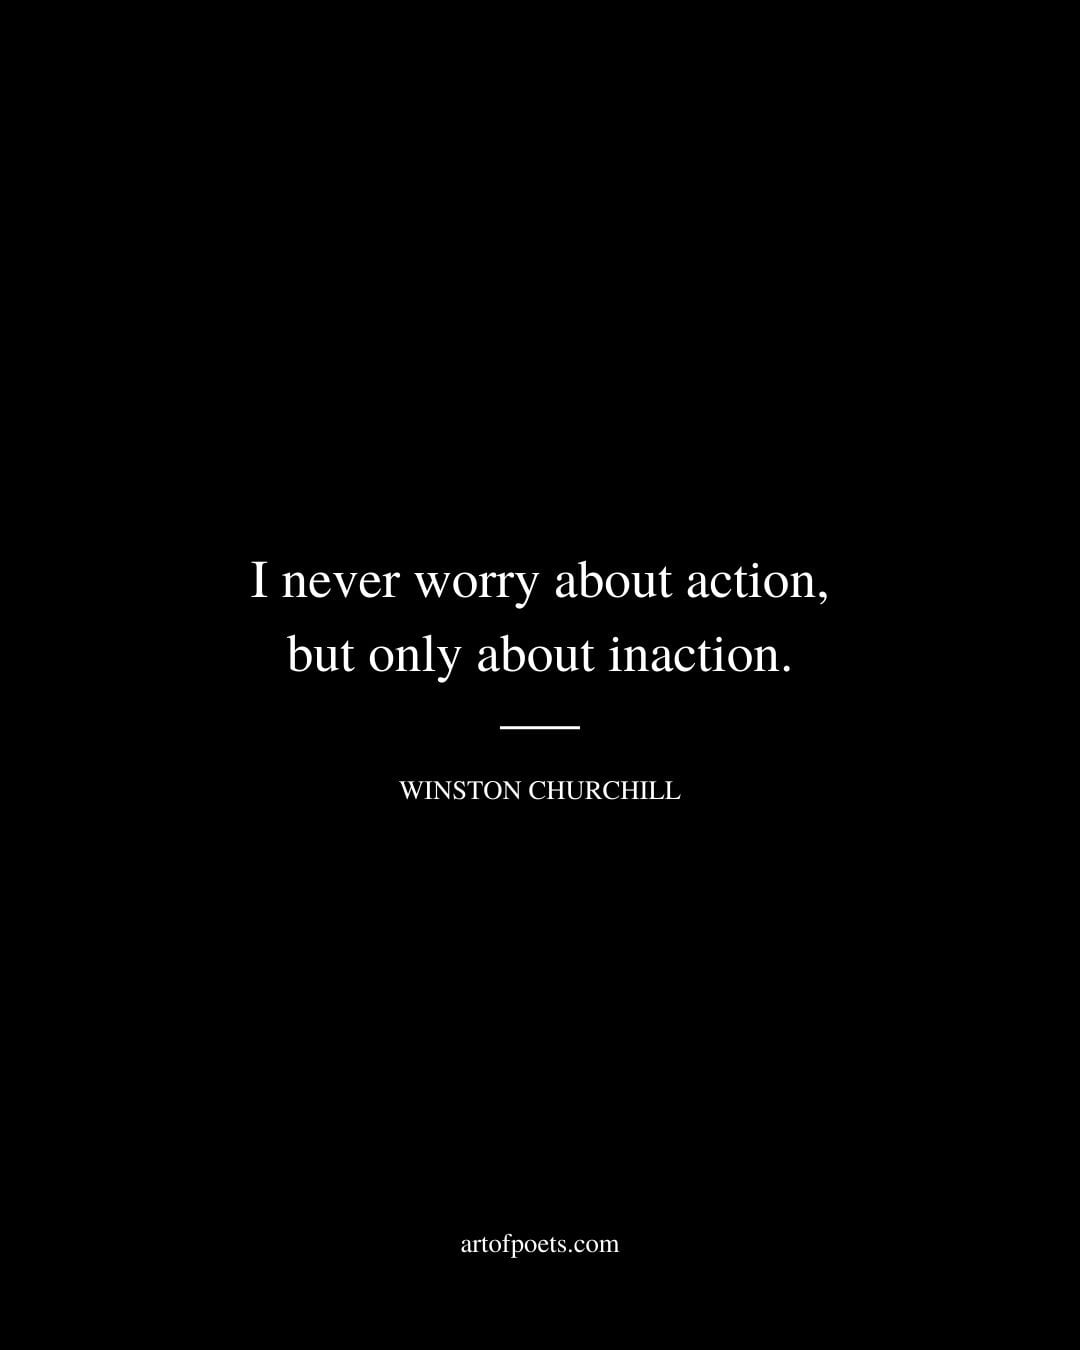 I never worry about action but only about inaction